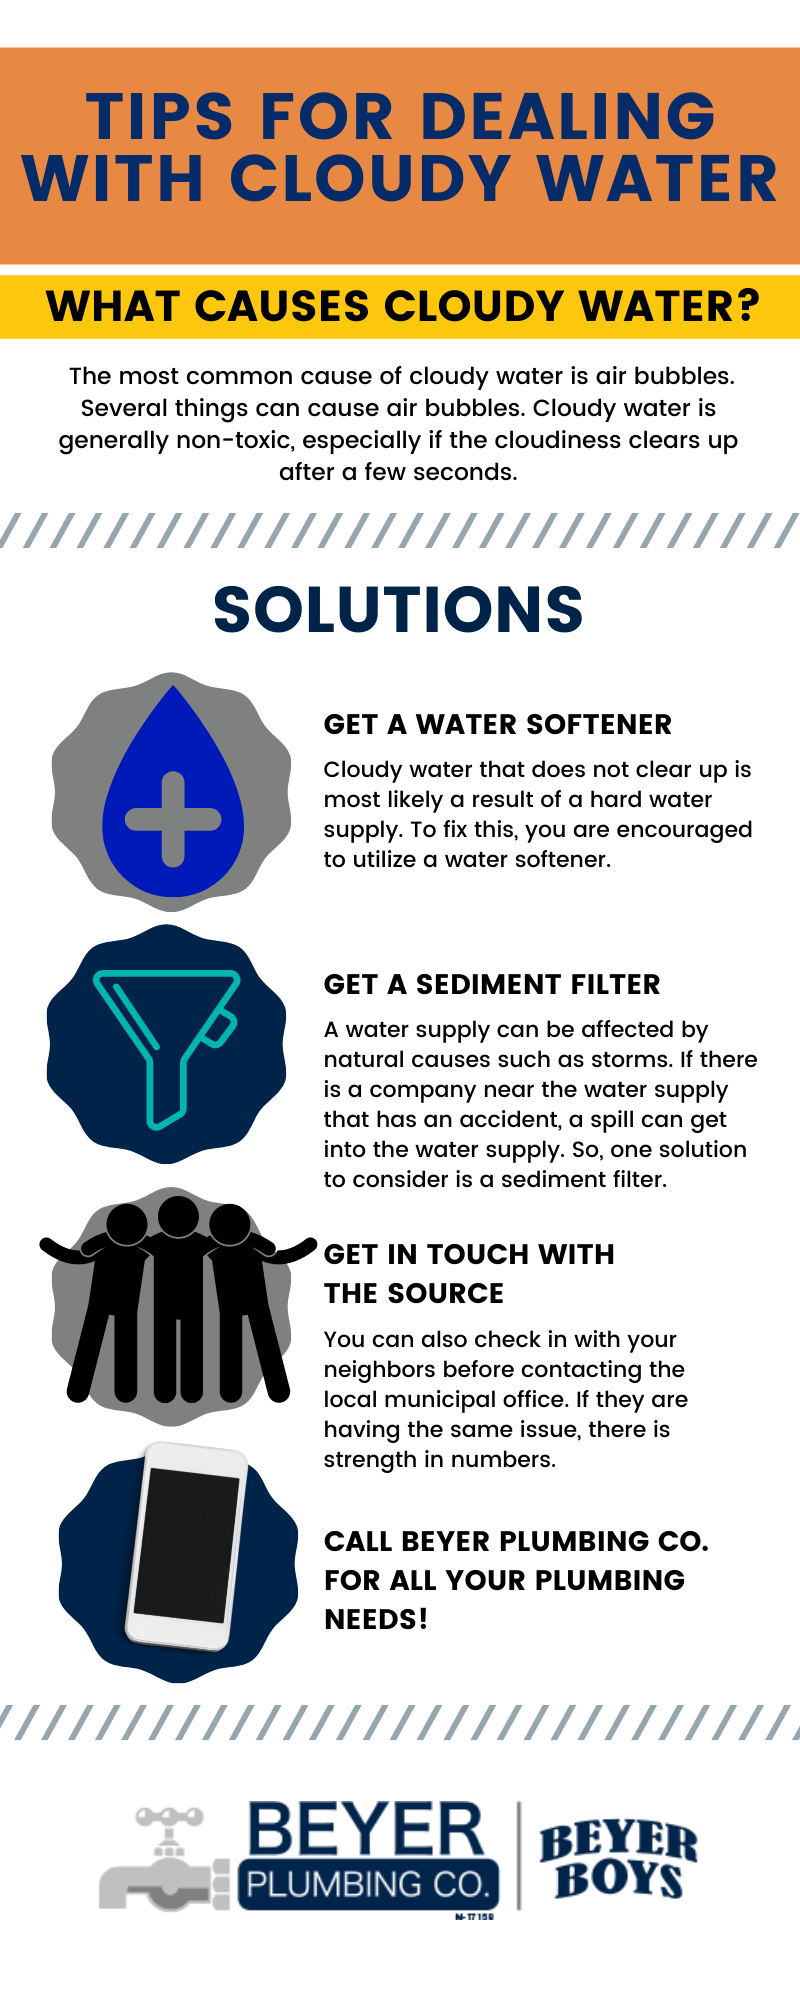 Tips for Cloudy Water